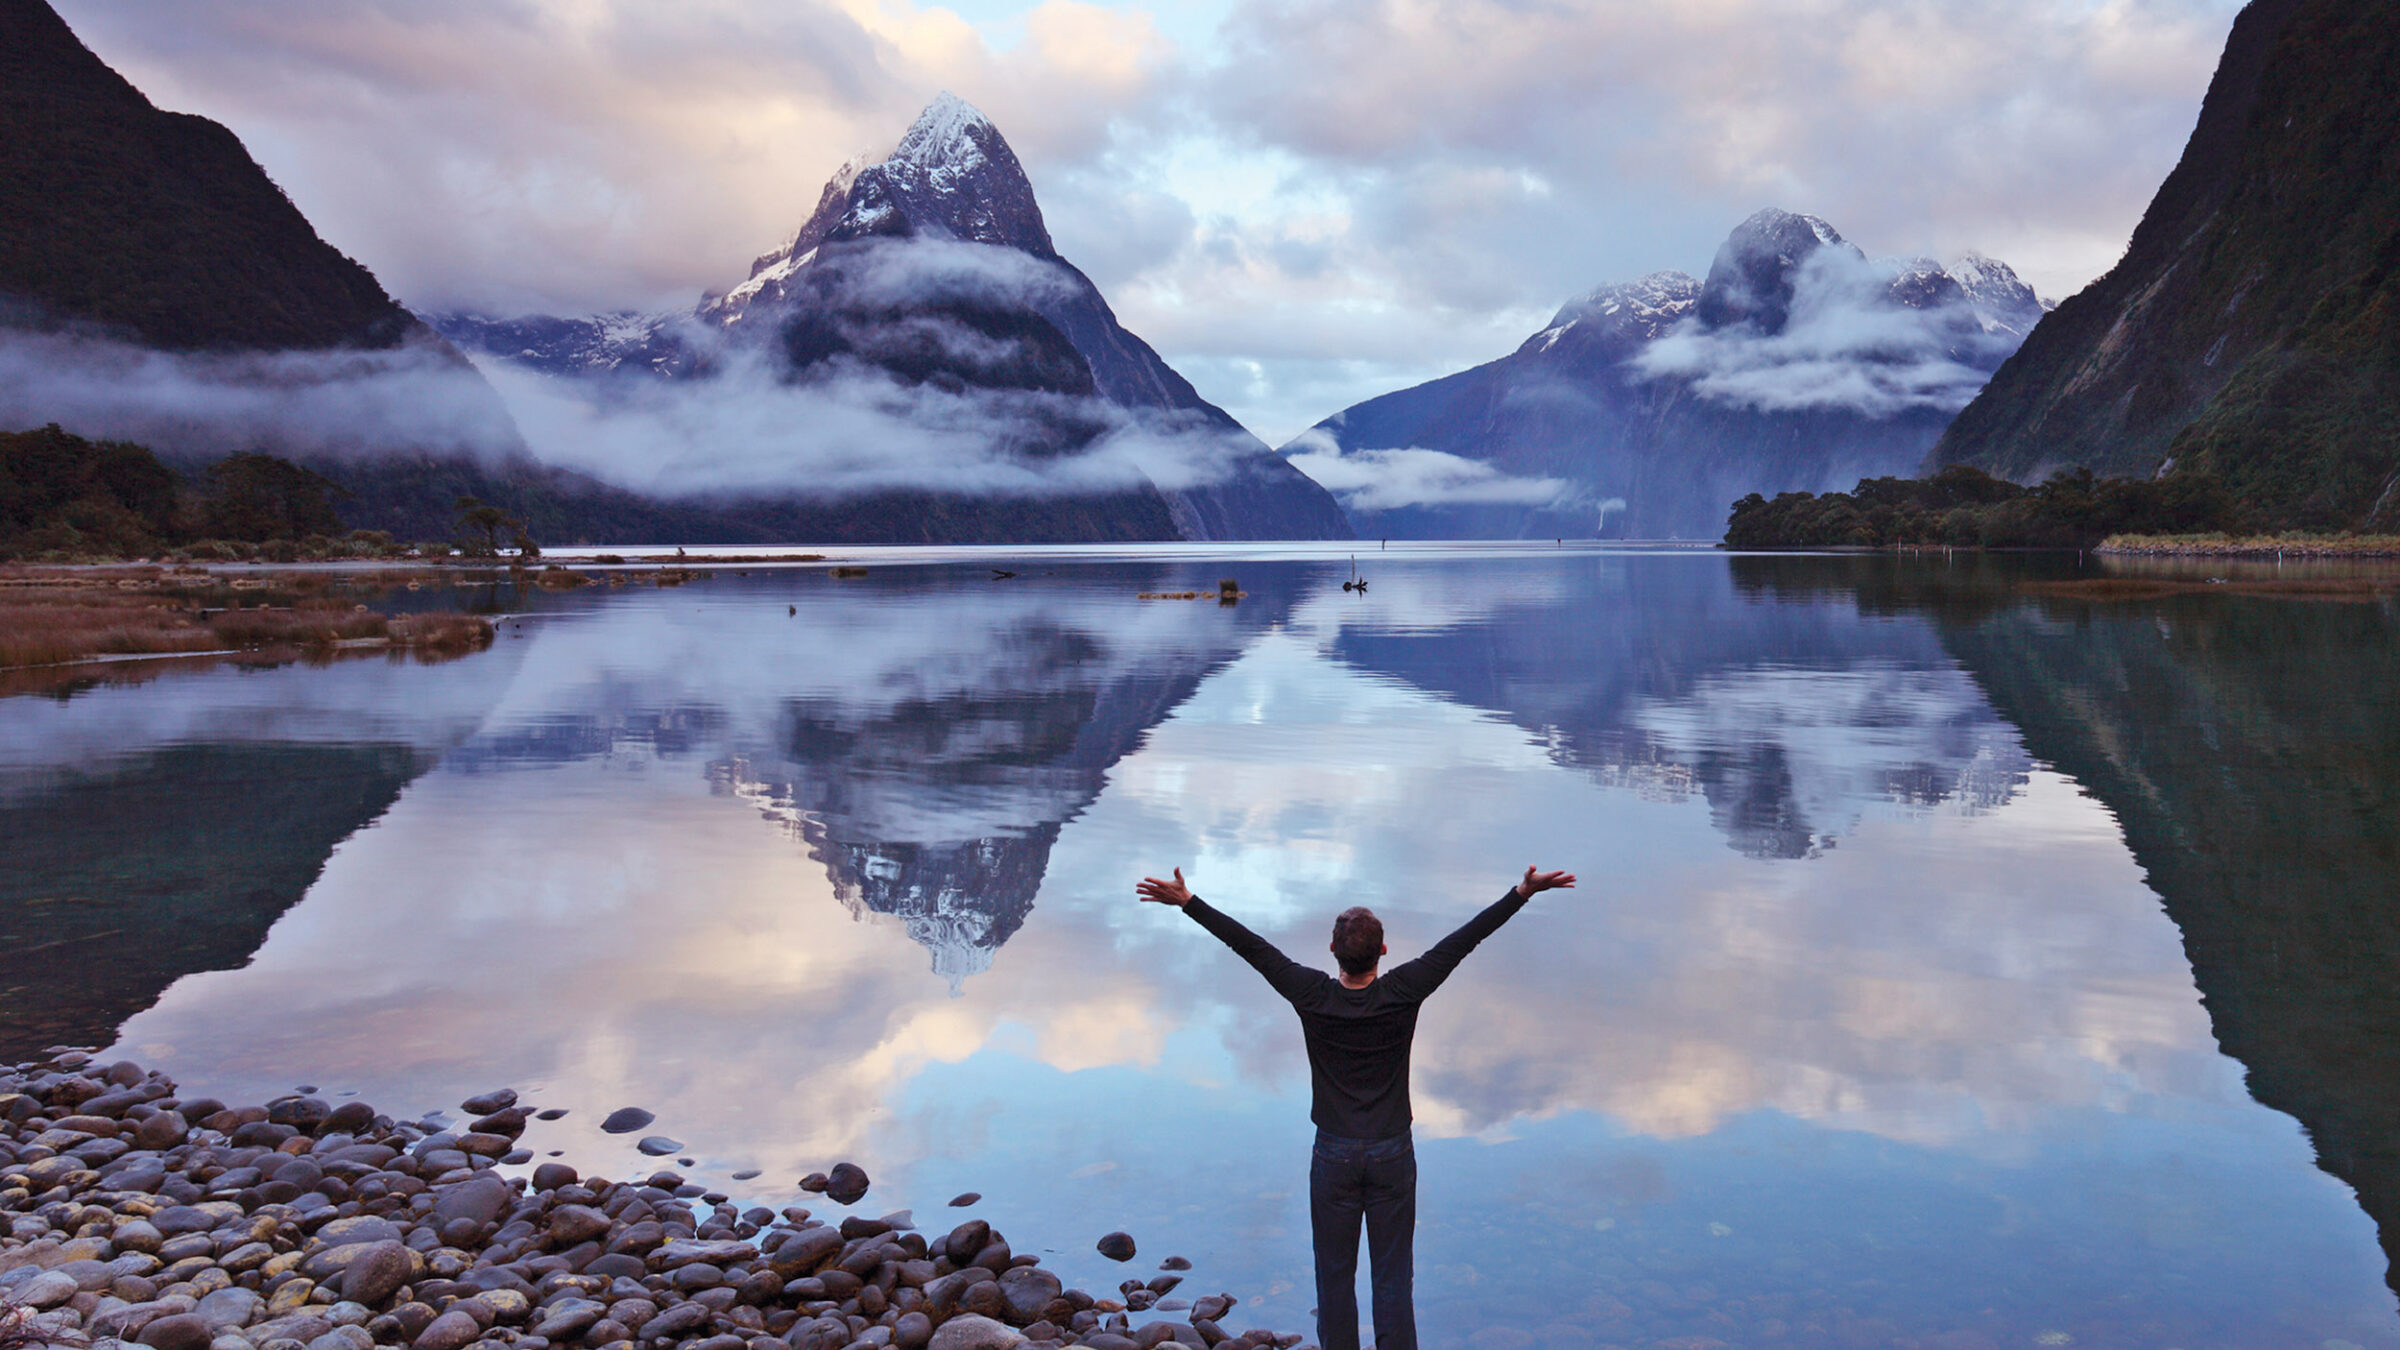 man with arms extended in the air looks at majestic mountains and lake